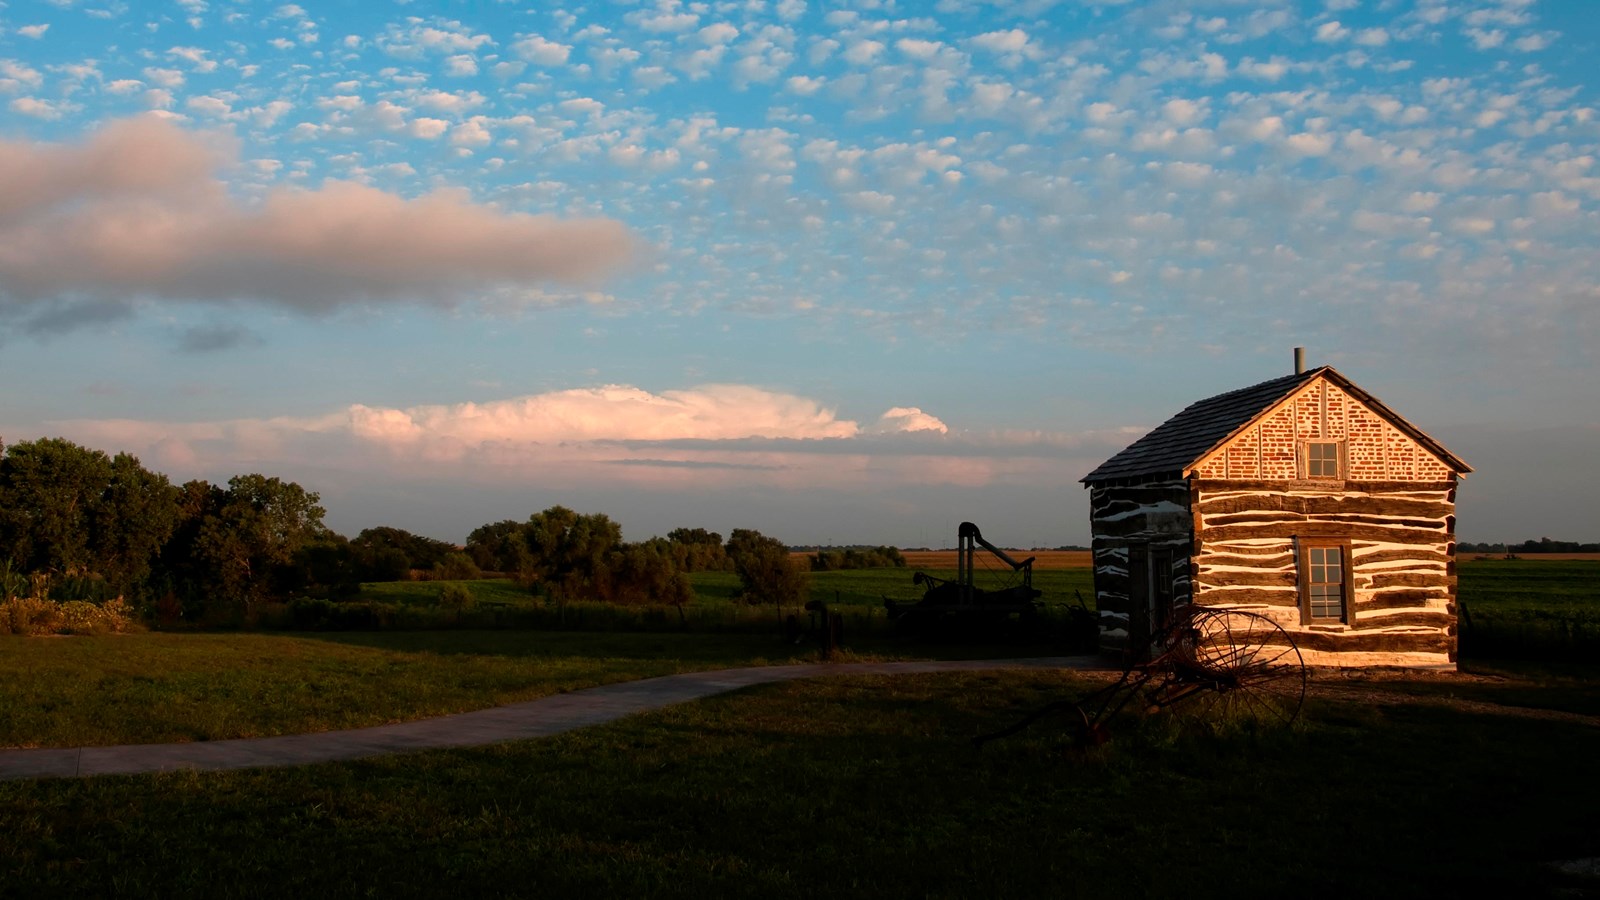 A wooden cabin stands on the plains.